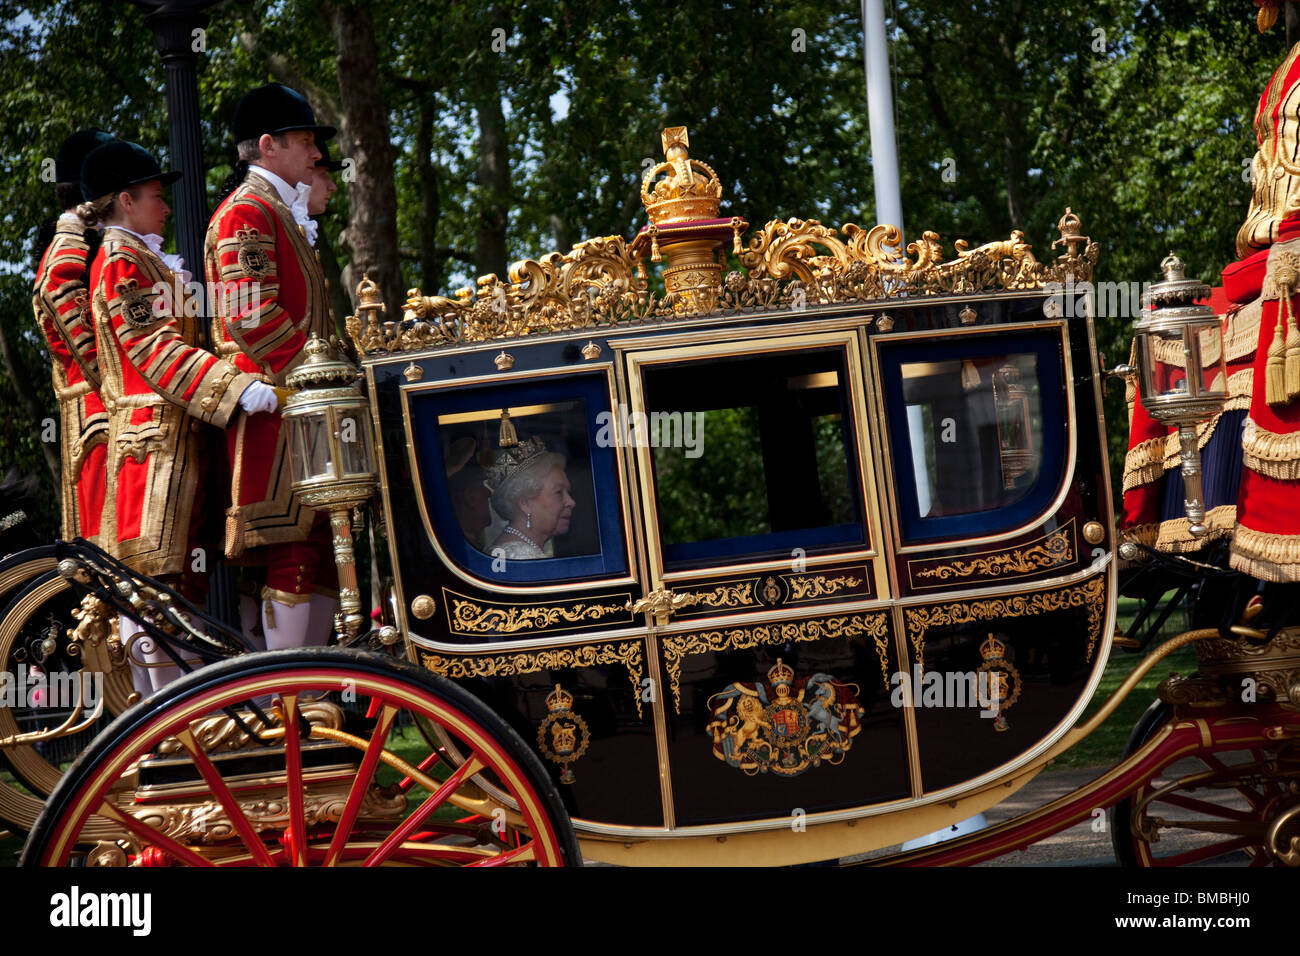 Queen Elizabeth II in the Royal Carriage. Royal procession for the State Opening of Parliament, London. Stock Photo